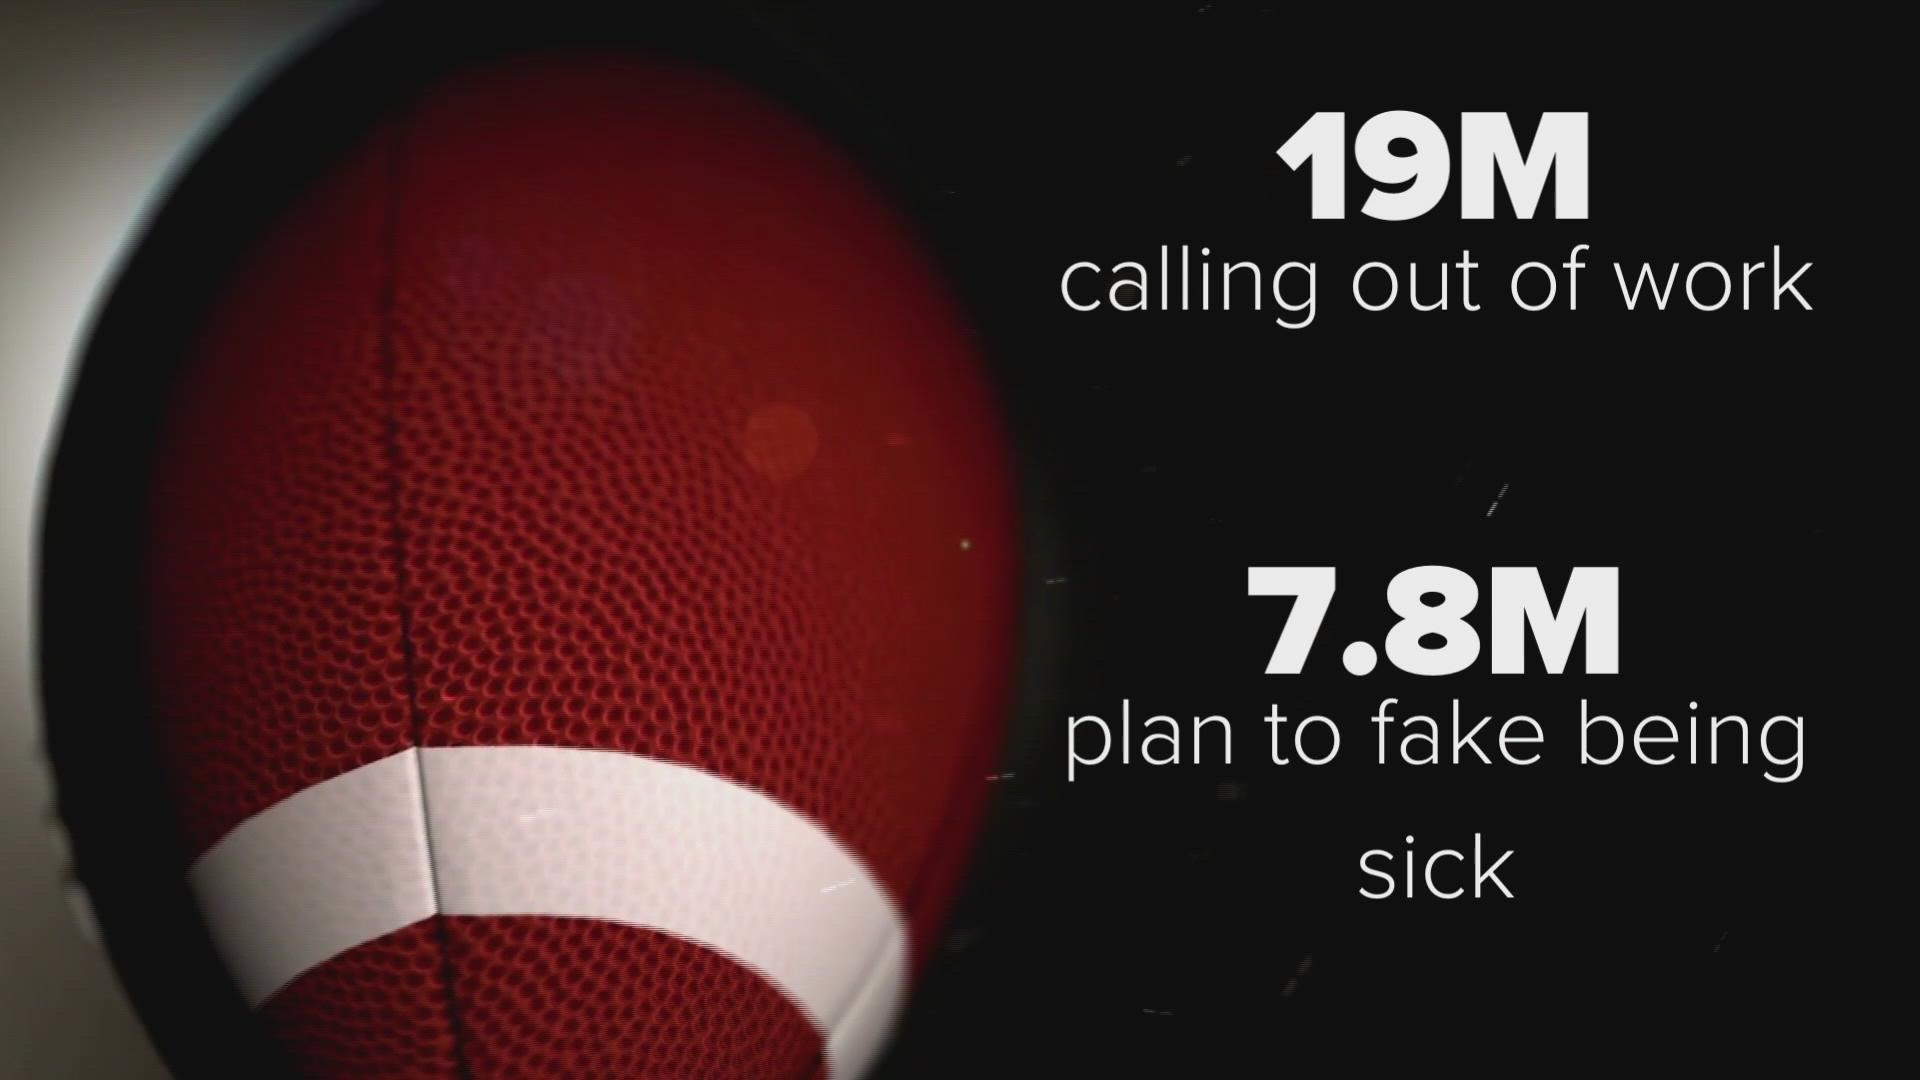 Millions of Americans are planning to take the Monday after Super Bowl Sunday off.